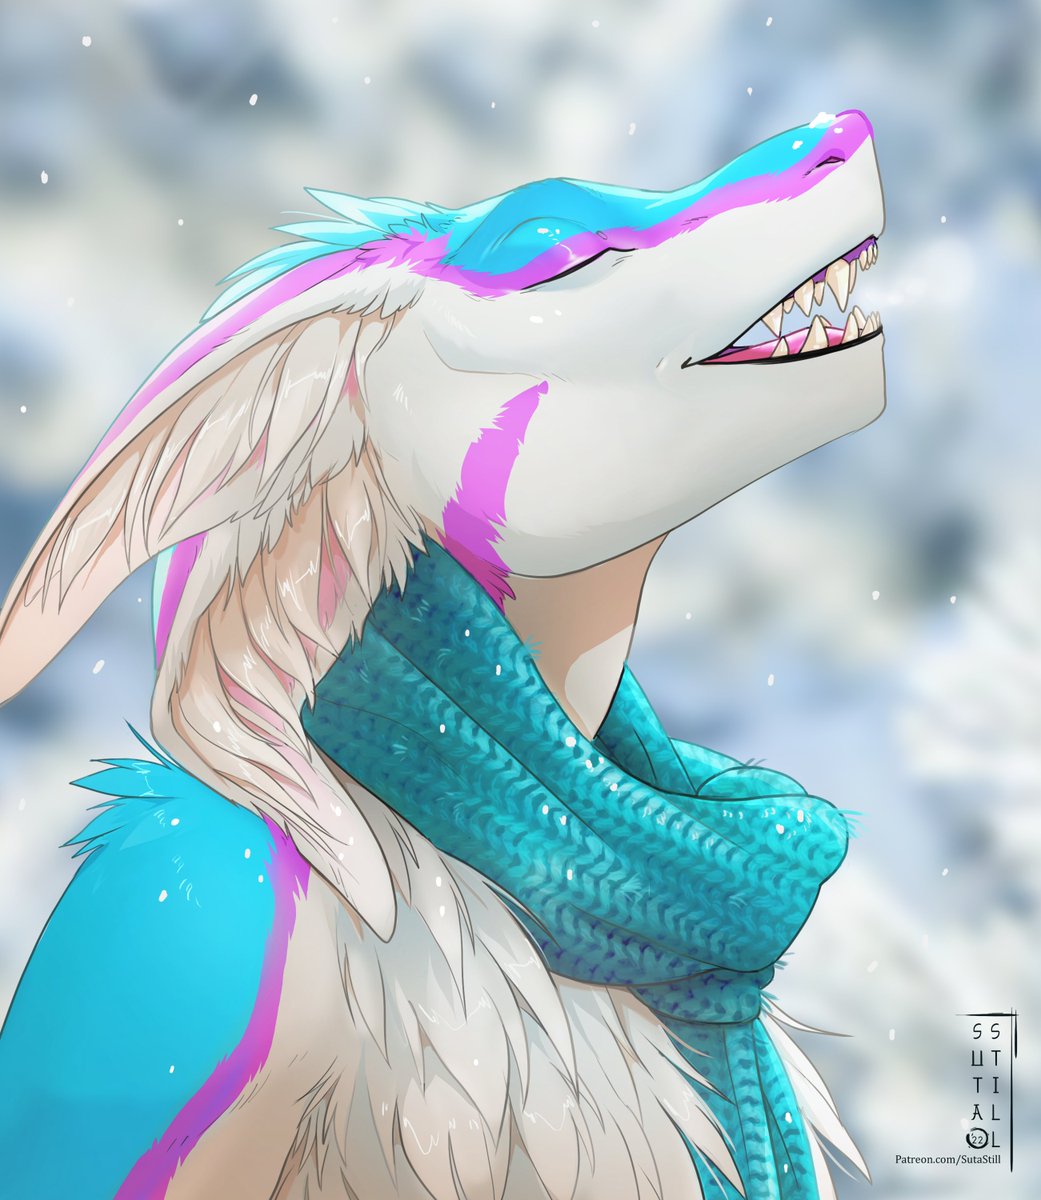 Headshot finished for Rhaegalsiron007 You can download the file over on my Patreon! Patreon.com/SutaStill